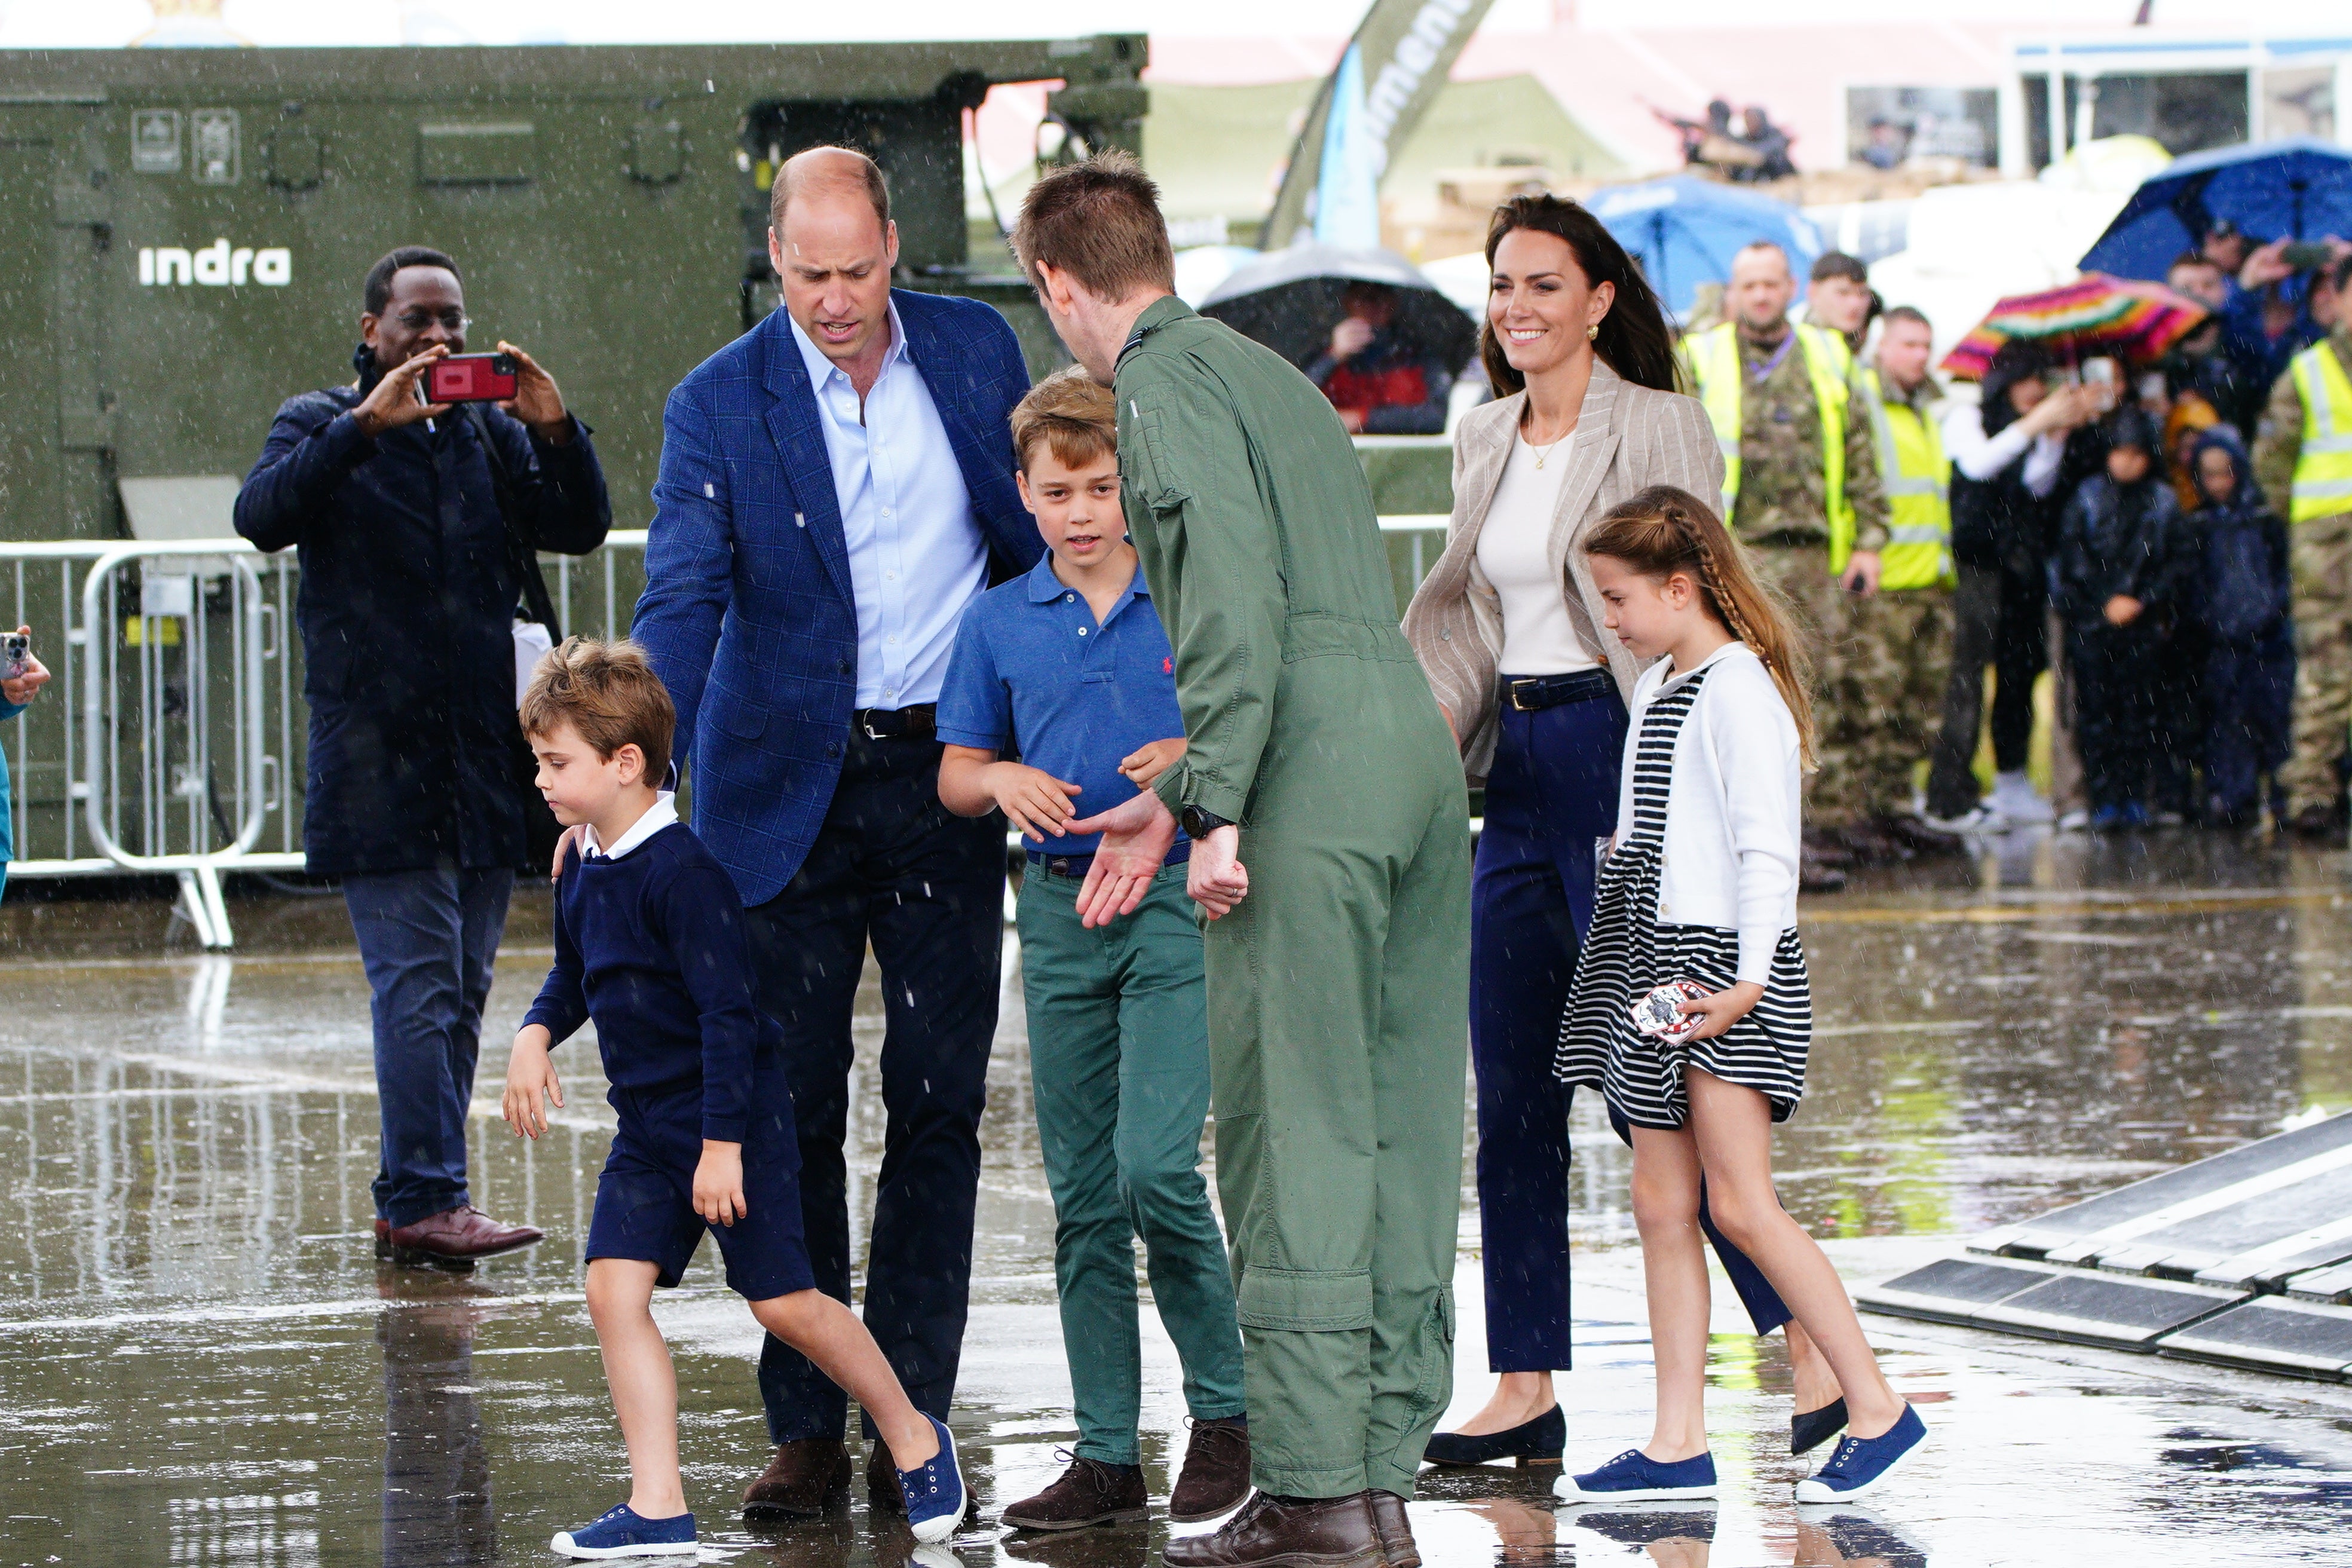 The Prince and Princess of Wales visit the Royal International Air Tattoo with their children